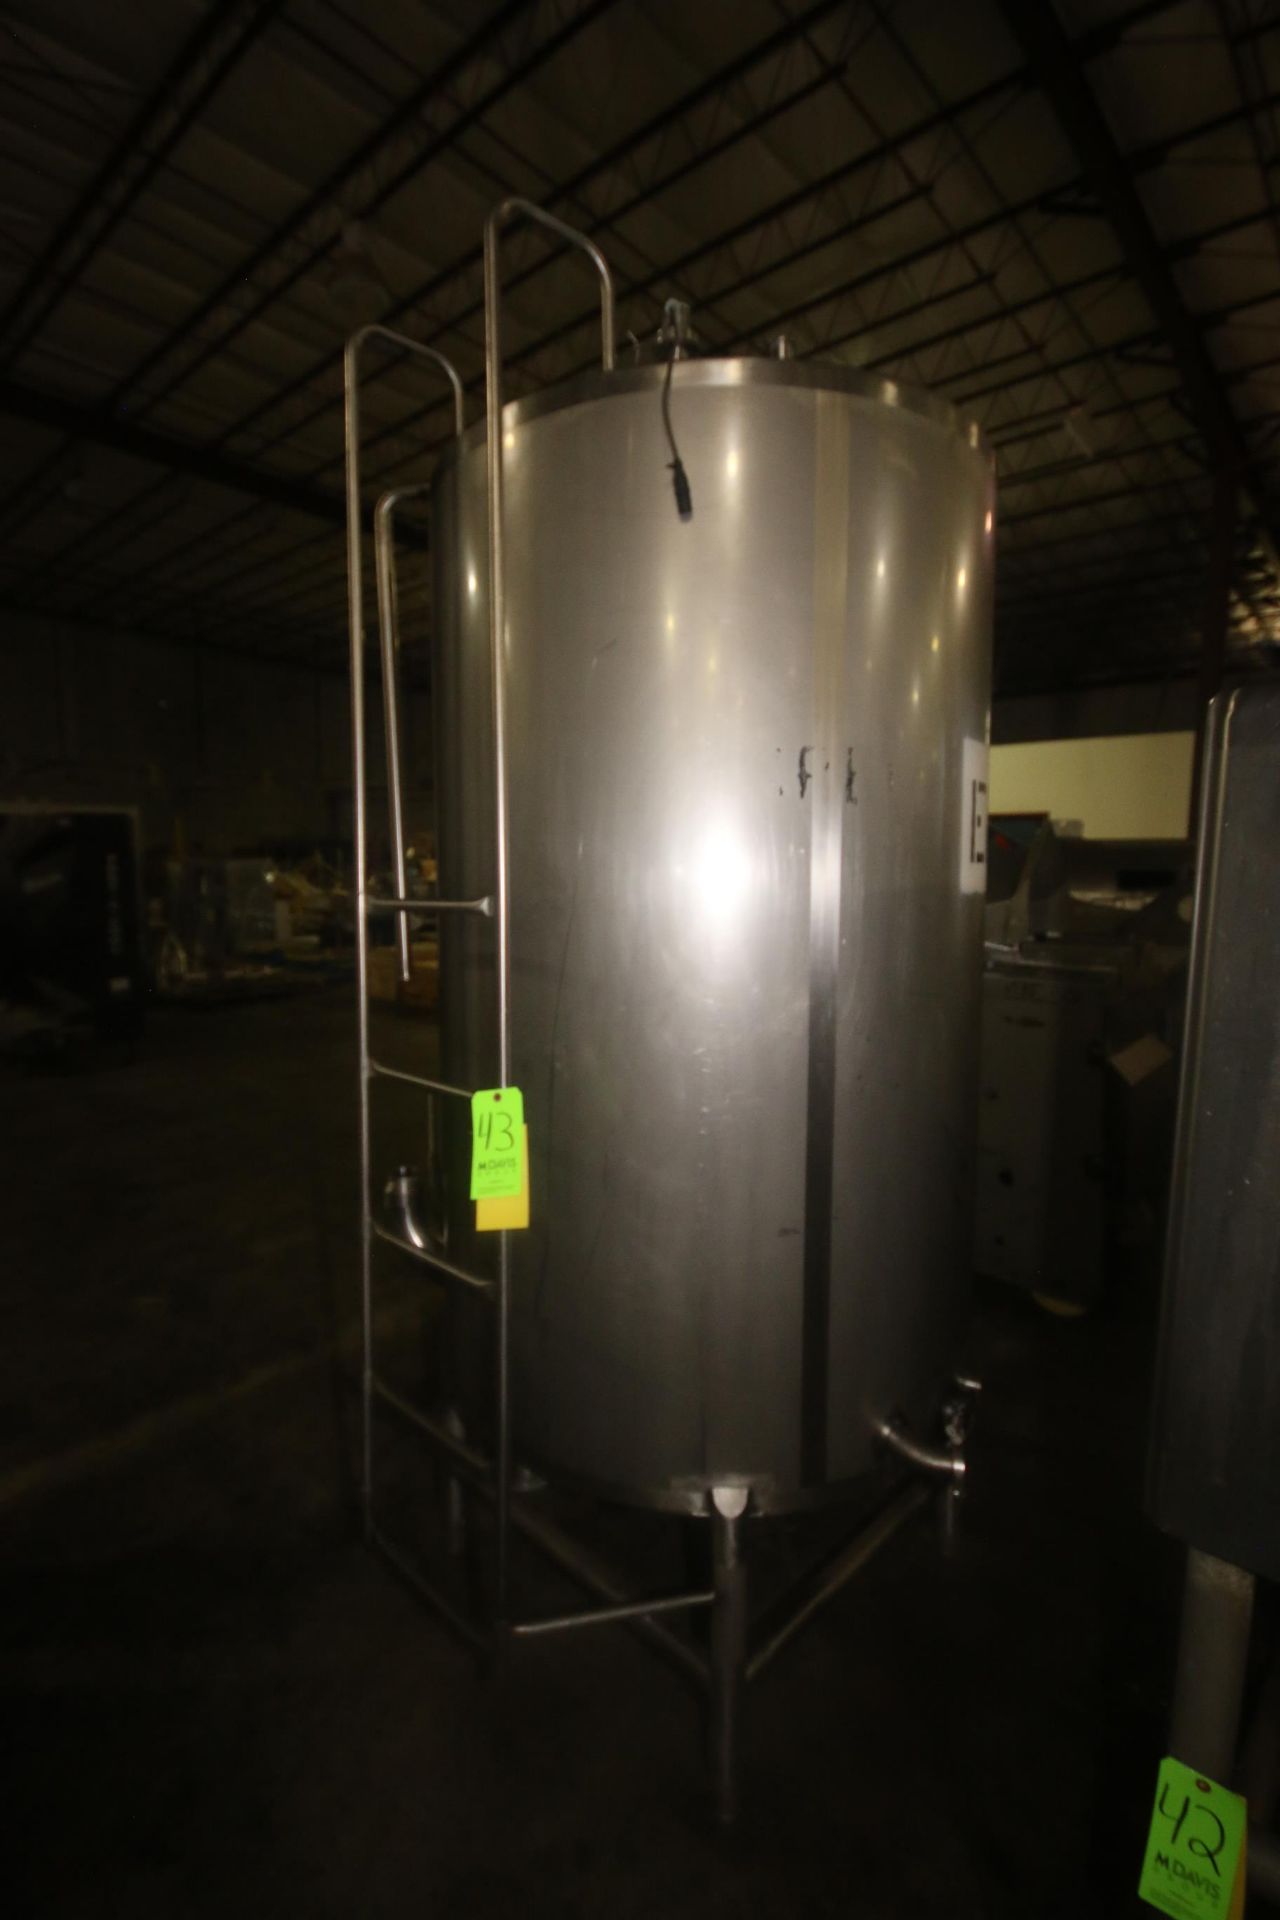 500 Gal. S/S Vertical Single Wall Tank, Tank Dims.: Aprox. 72" H x 46" Dia., with Front Mounted S/